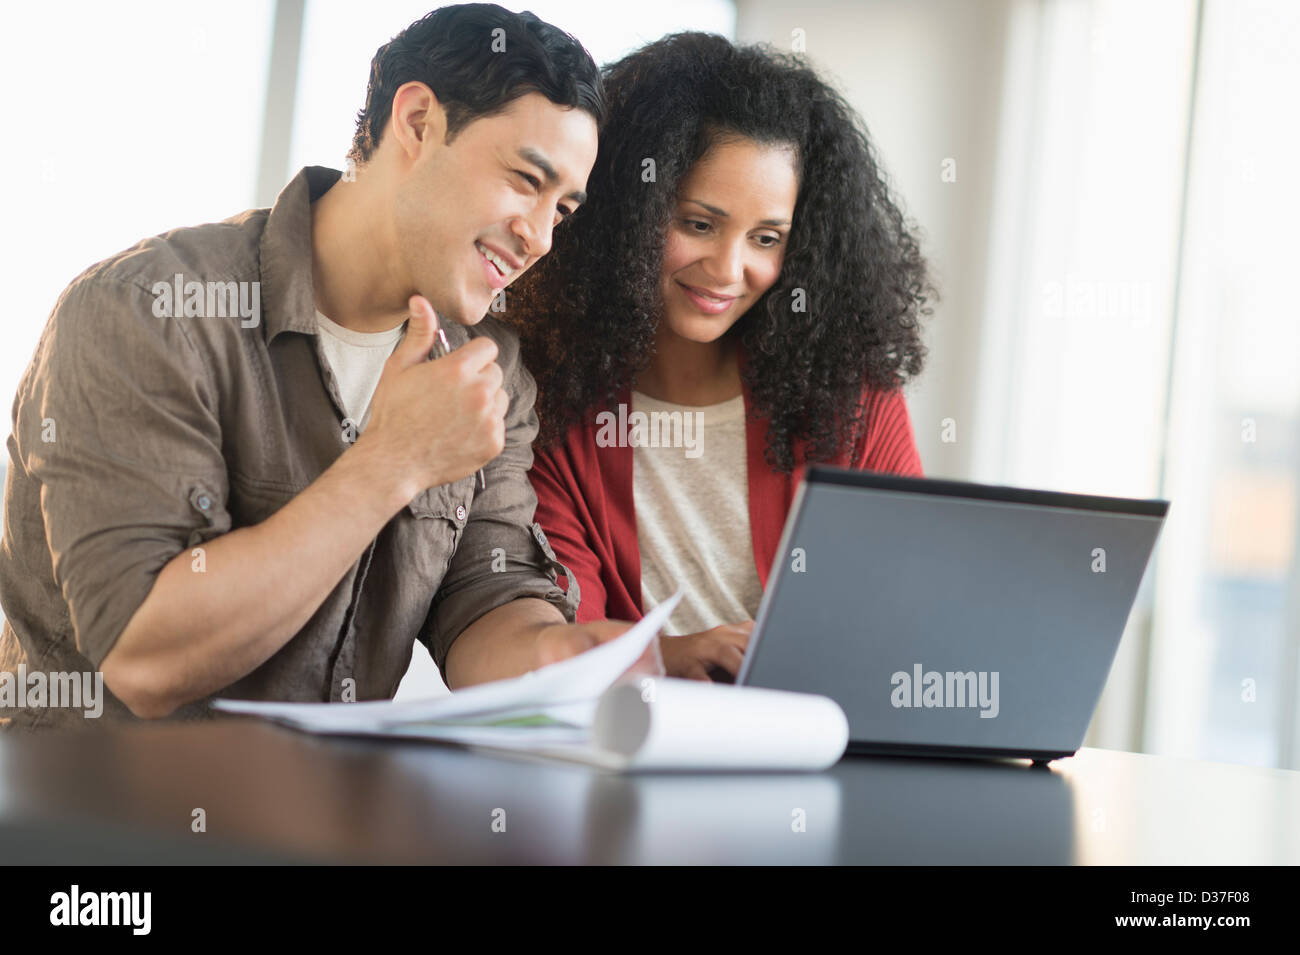 USA, New Jersey, Jersey City, Smiling couple planning home ownership with model home Stock Photo